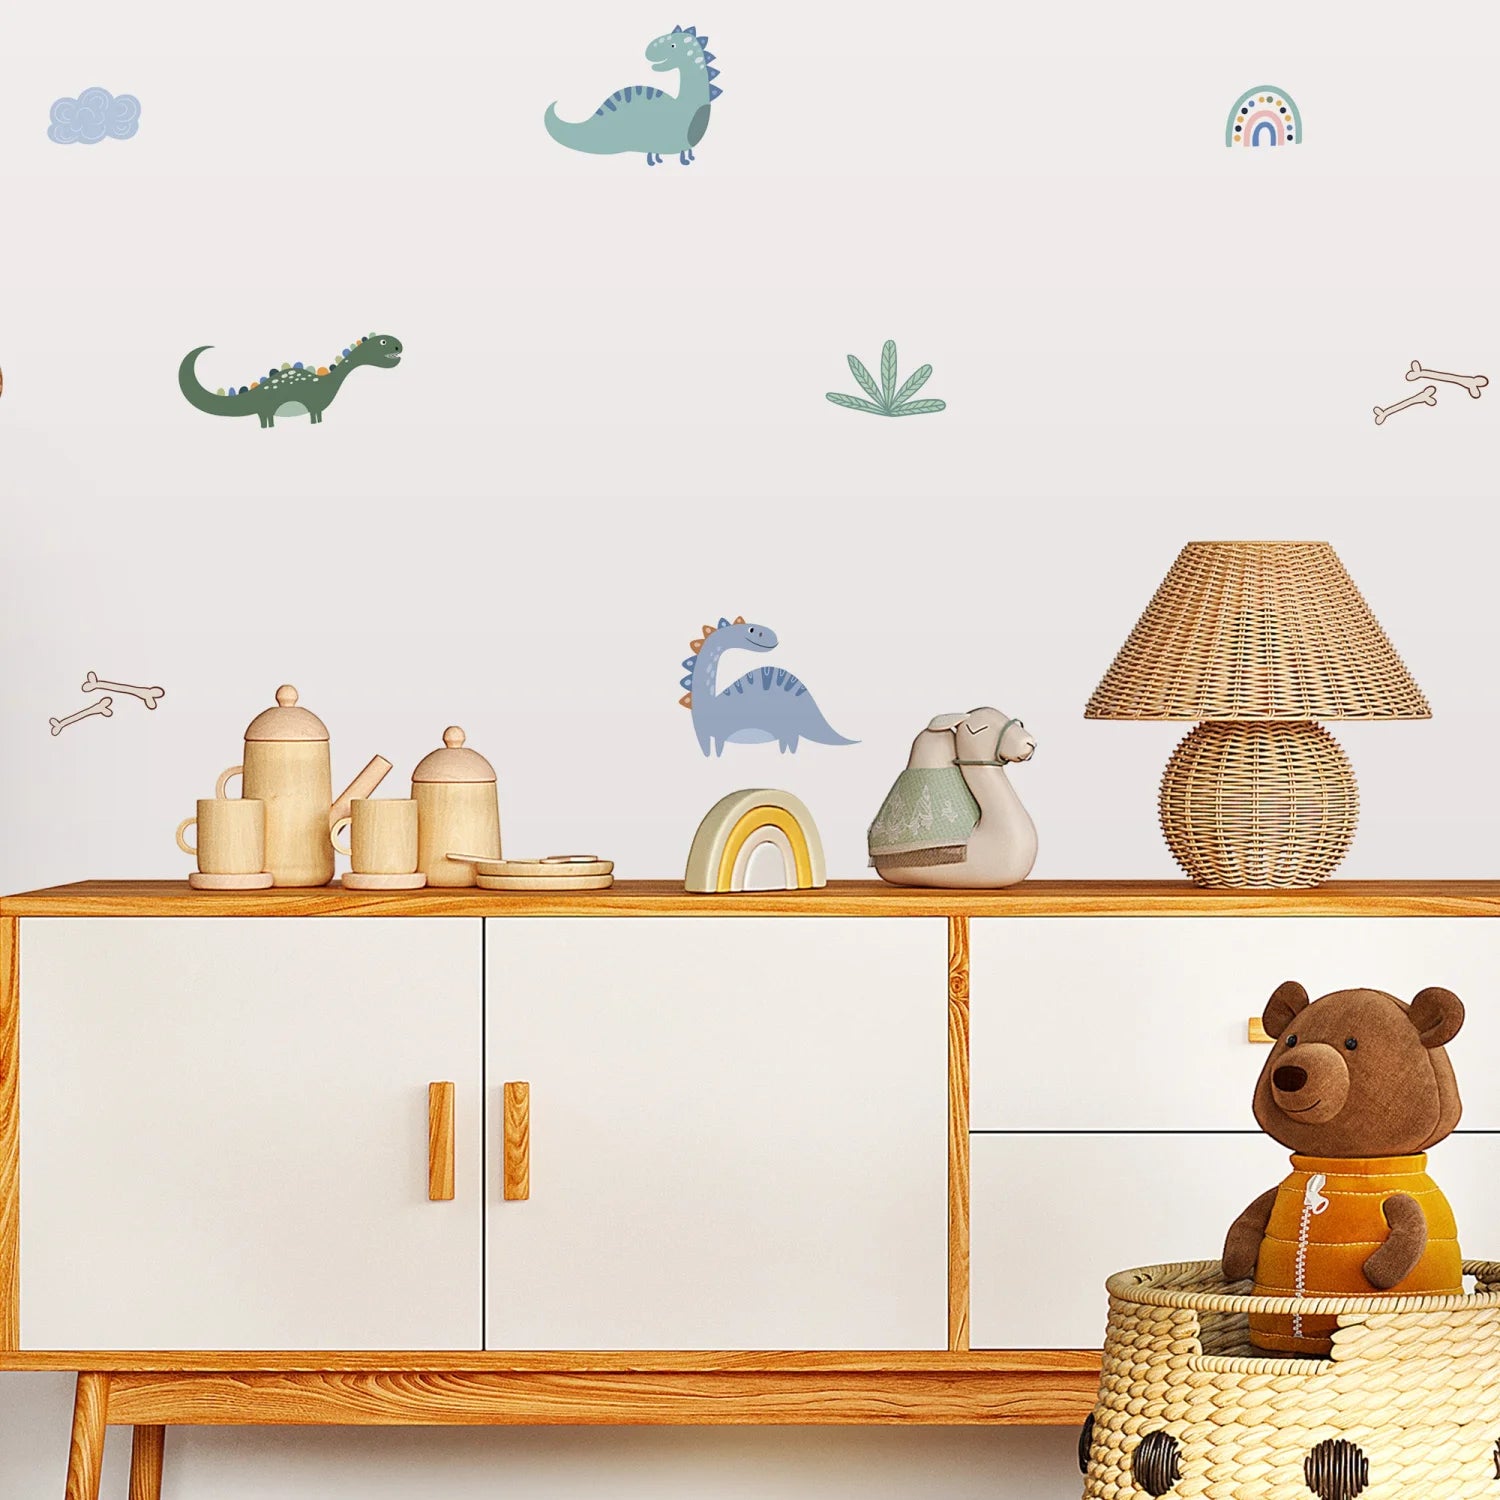 Jurassic Themed Wall Decals - Decals - Animals